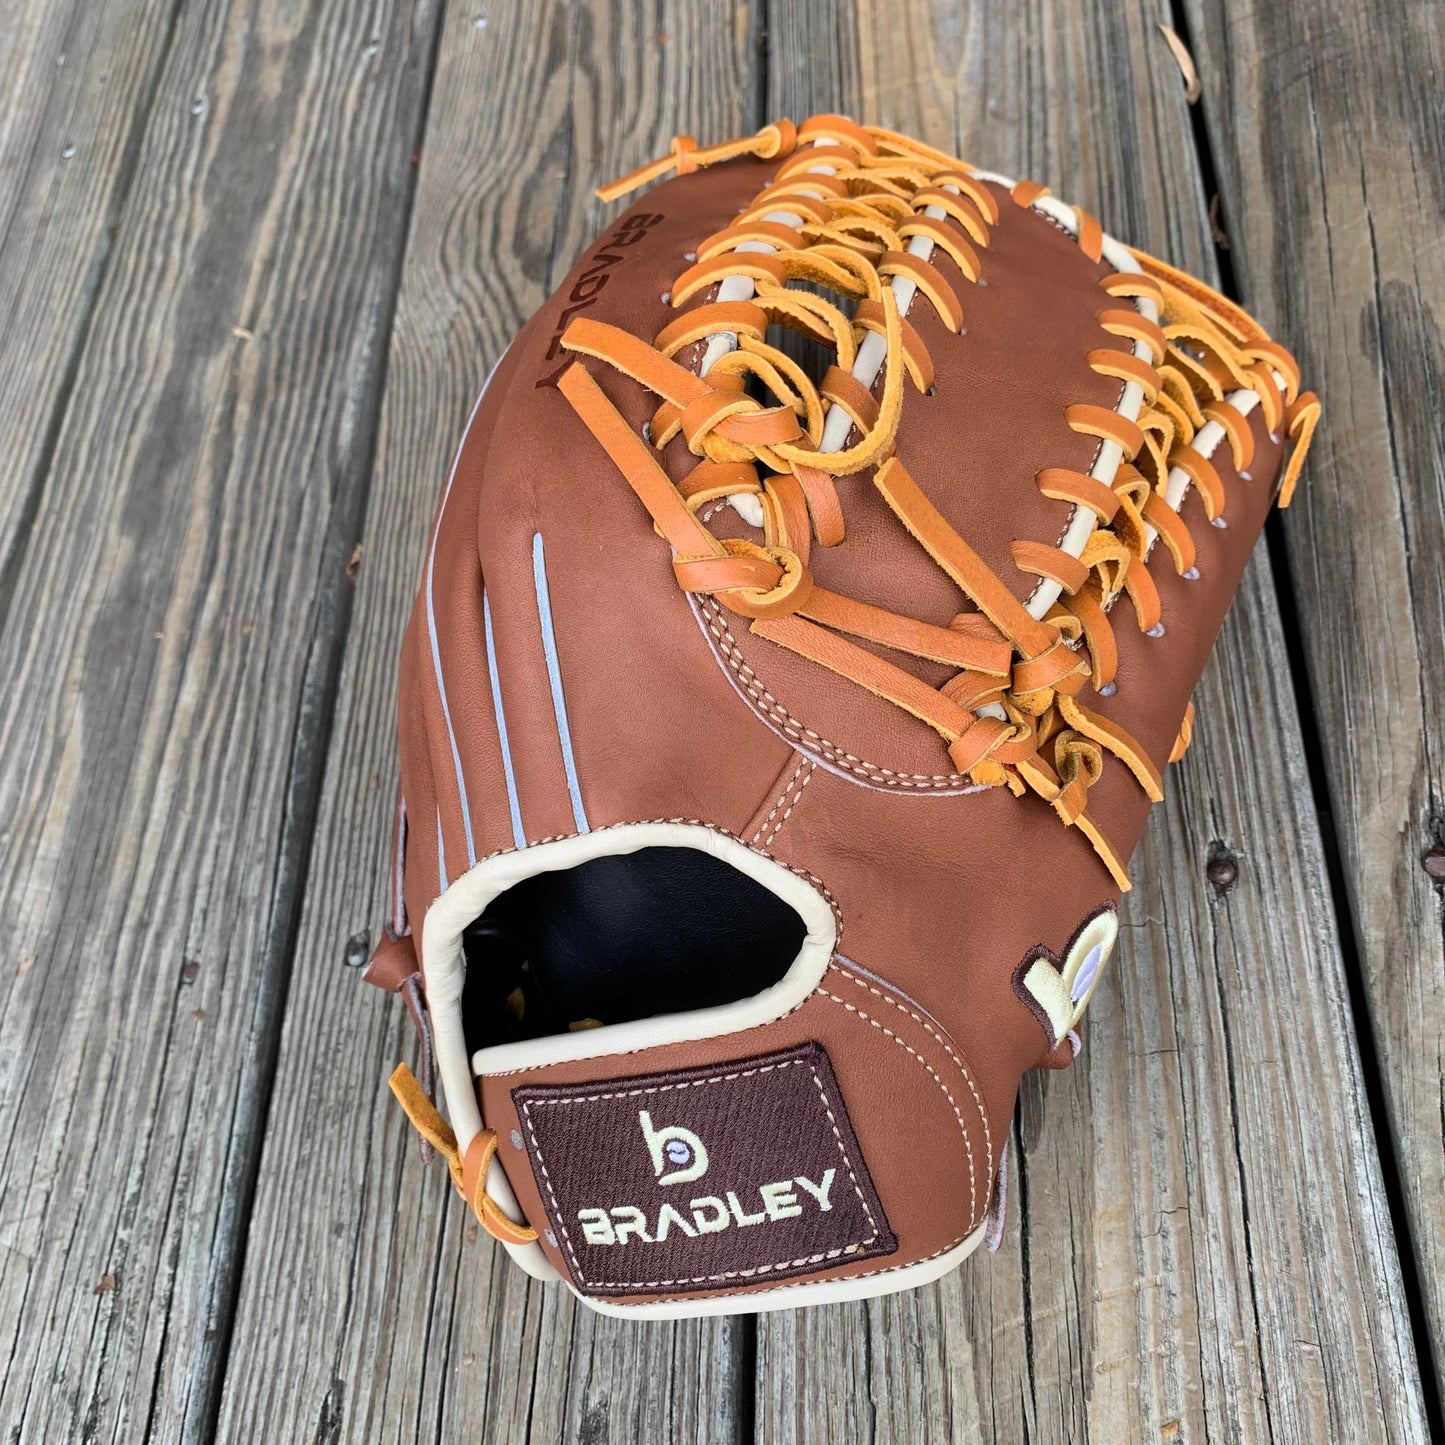 6-Finger Trap, Next Play USA Steerhide '23 CLEARANCE, AUTOMATIC 20% OFF AT CHECKOUT